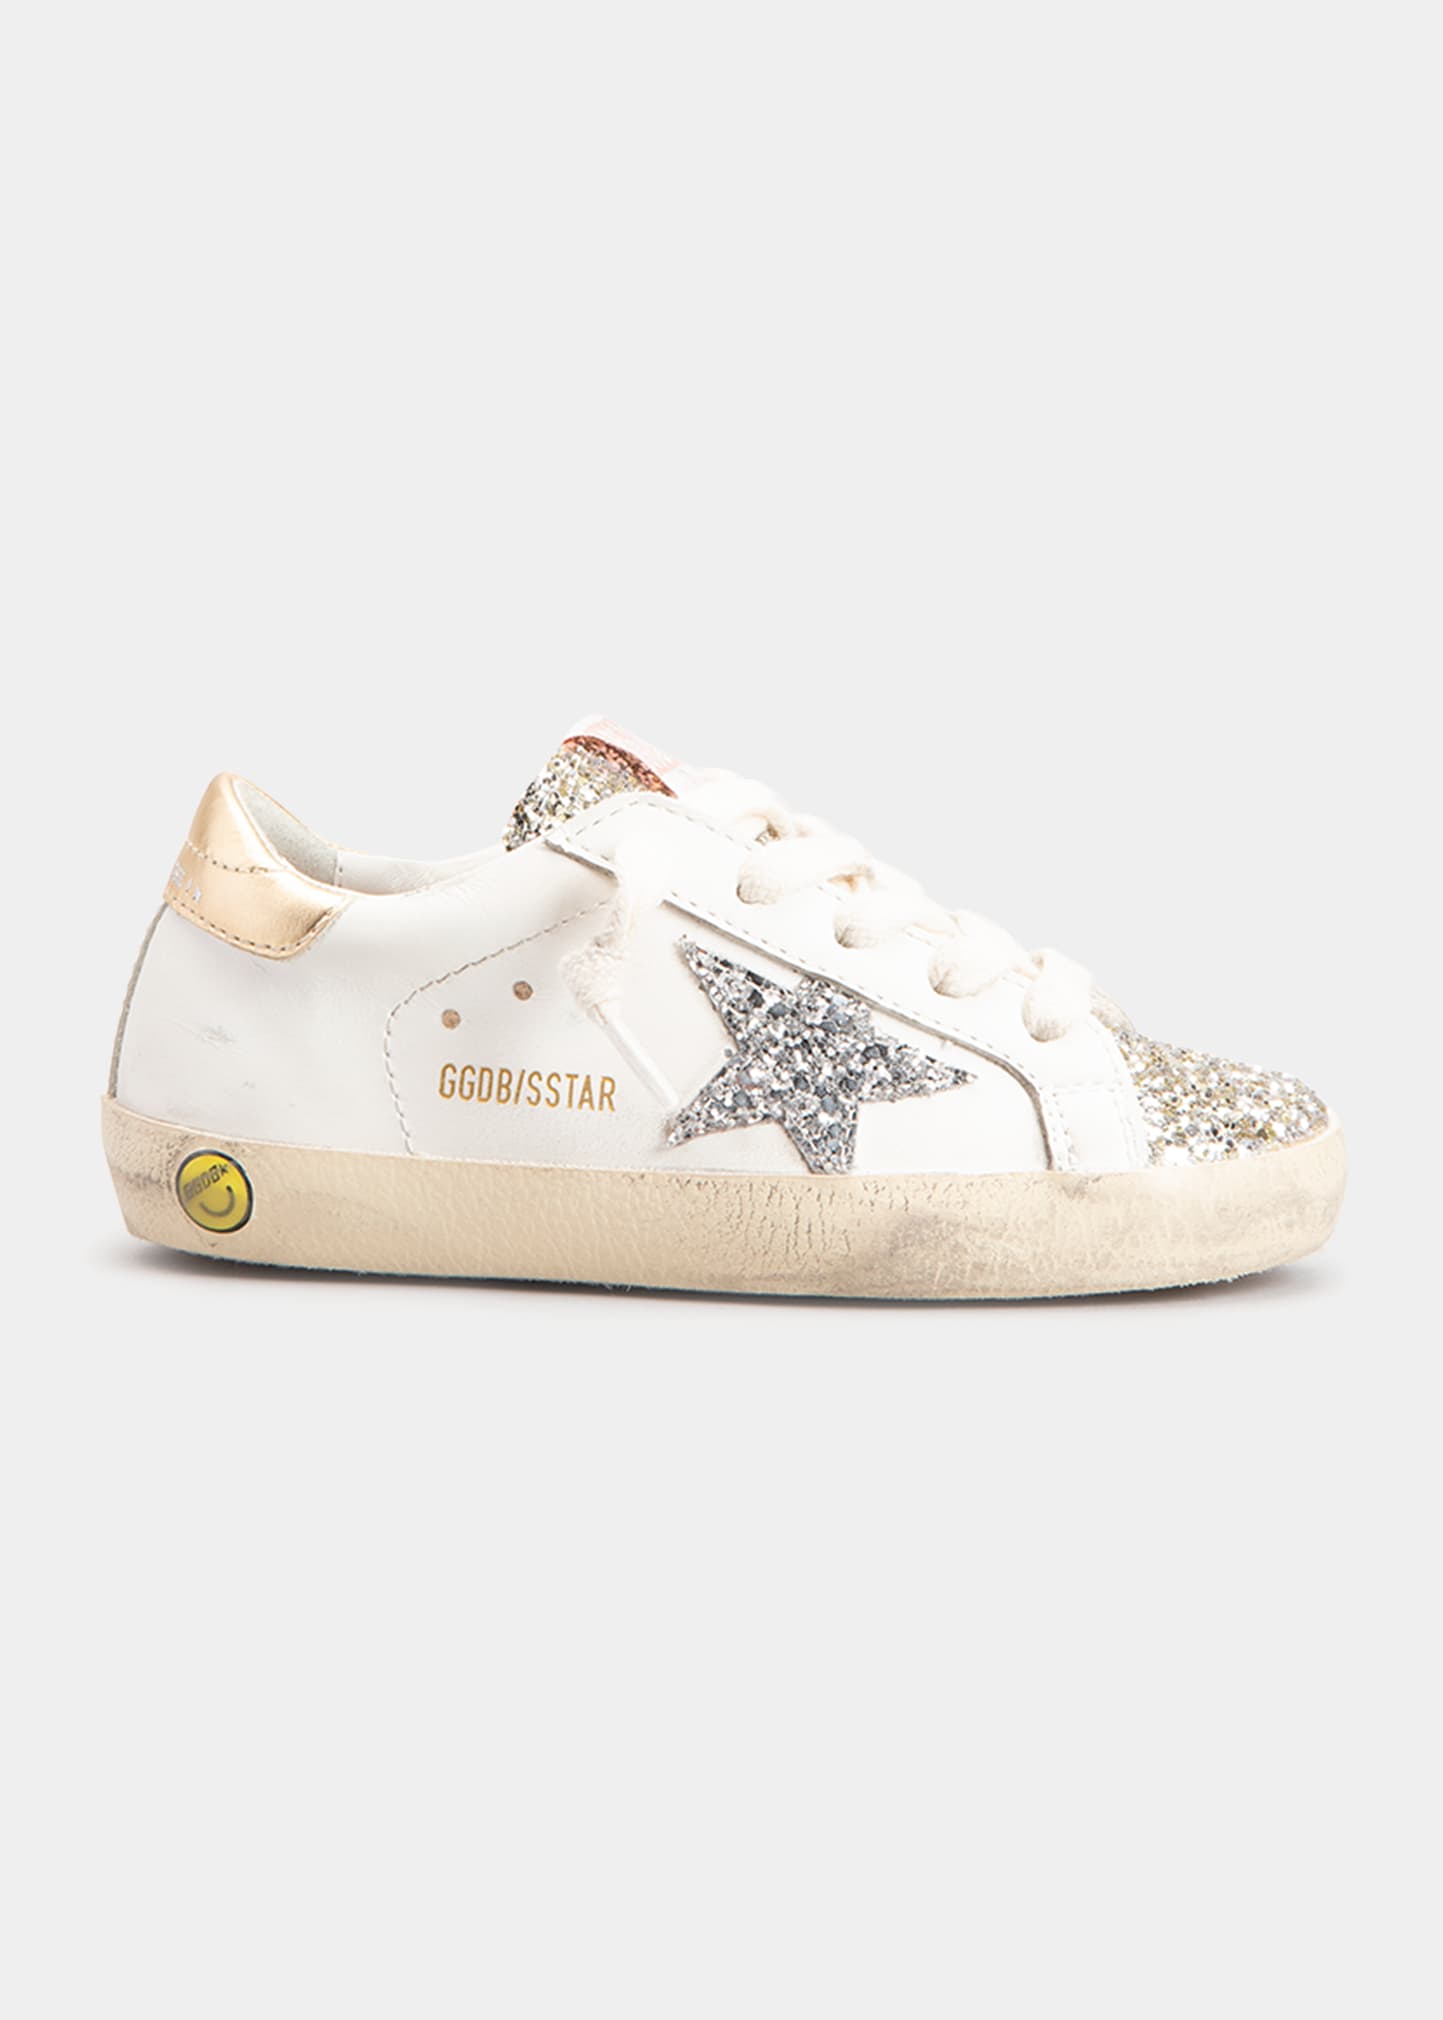 Golden Goose Kids' Girl's Super Star Glitter Trim Leather Sneakers, Baby/toddlers